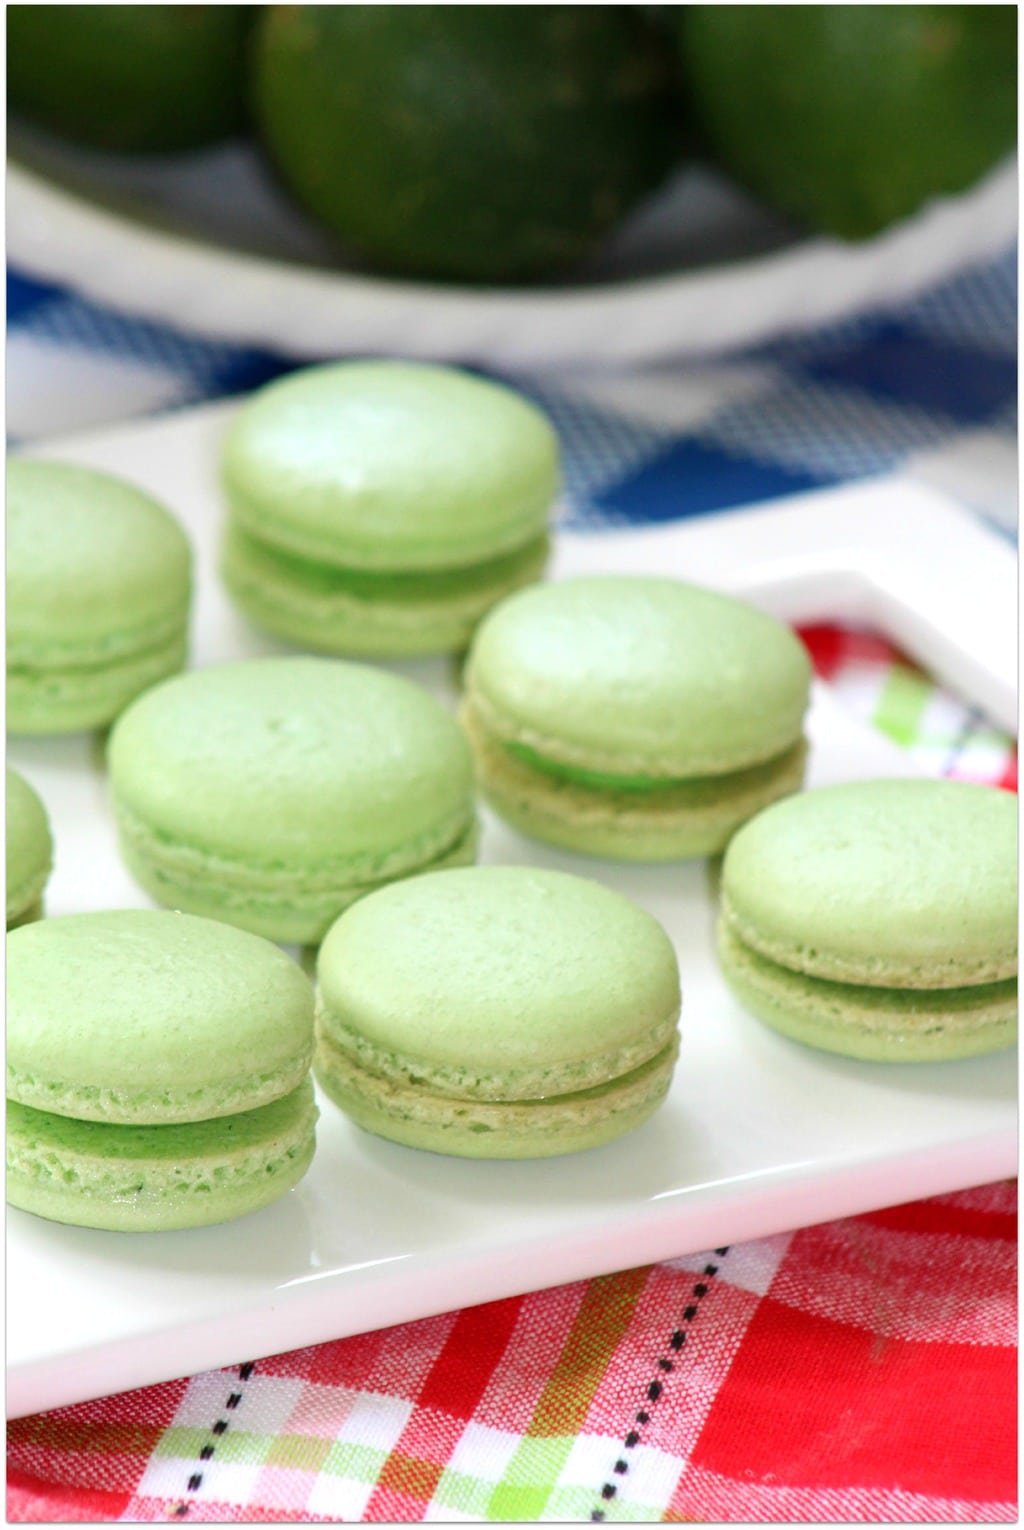 Cookies are one of my favorite foods. I adore macarons, but whenever I see them in a bakery, they are so crazy expensive. Surprisingly, they are not that hard to make! As almond flour is used, that part of the recipe is a bit more expensive, but they are so worth it. Don’t buy these when you can DIY. This lime version is perfect for a summer dessert! These would also make a lovely gift.